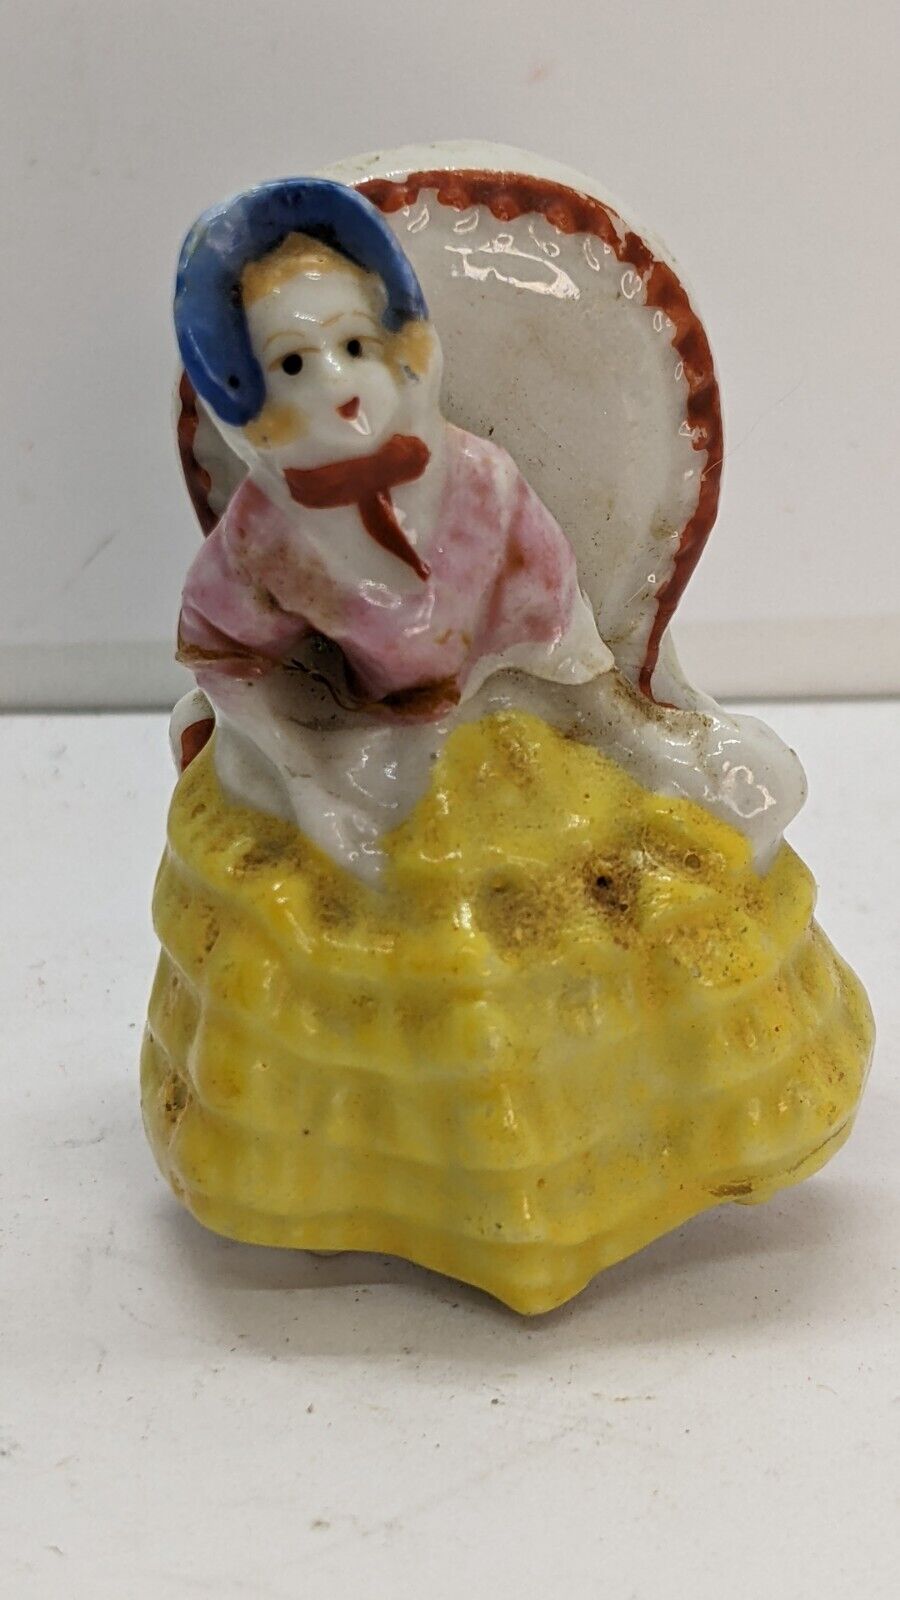 Vintage Southern Bell Victorian Lady Figurine on Chair Porcelain occupied Japan